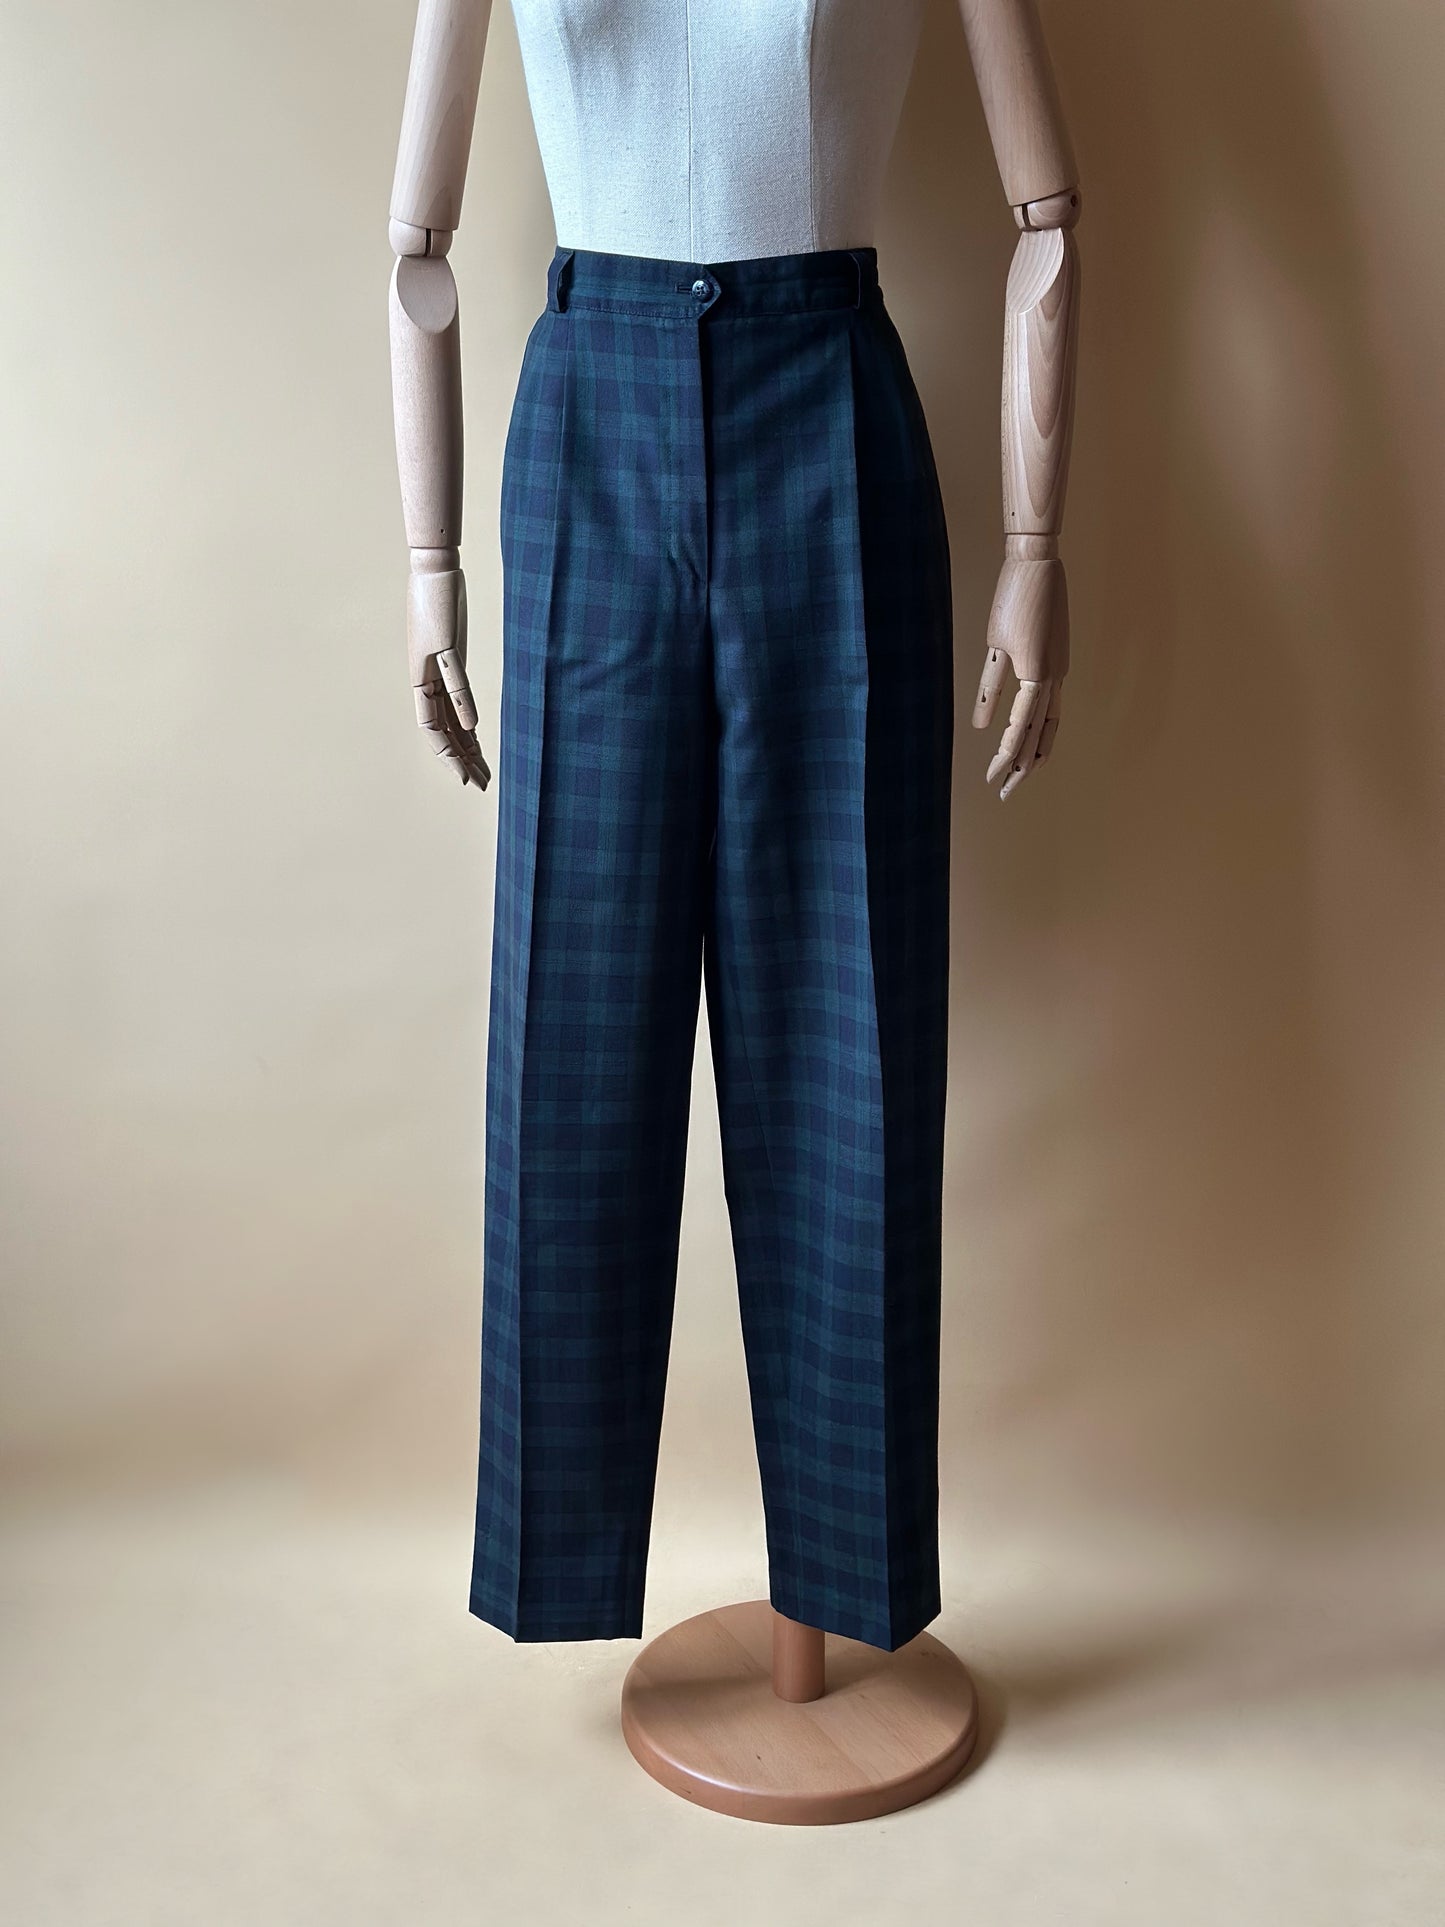 Vintage Checkered Blue & Green Trousers